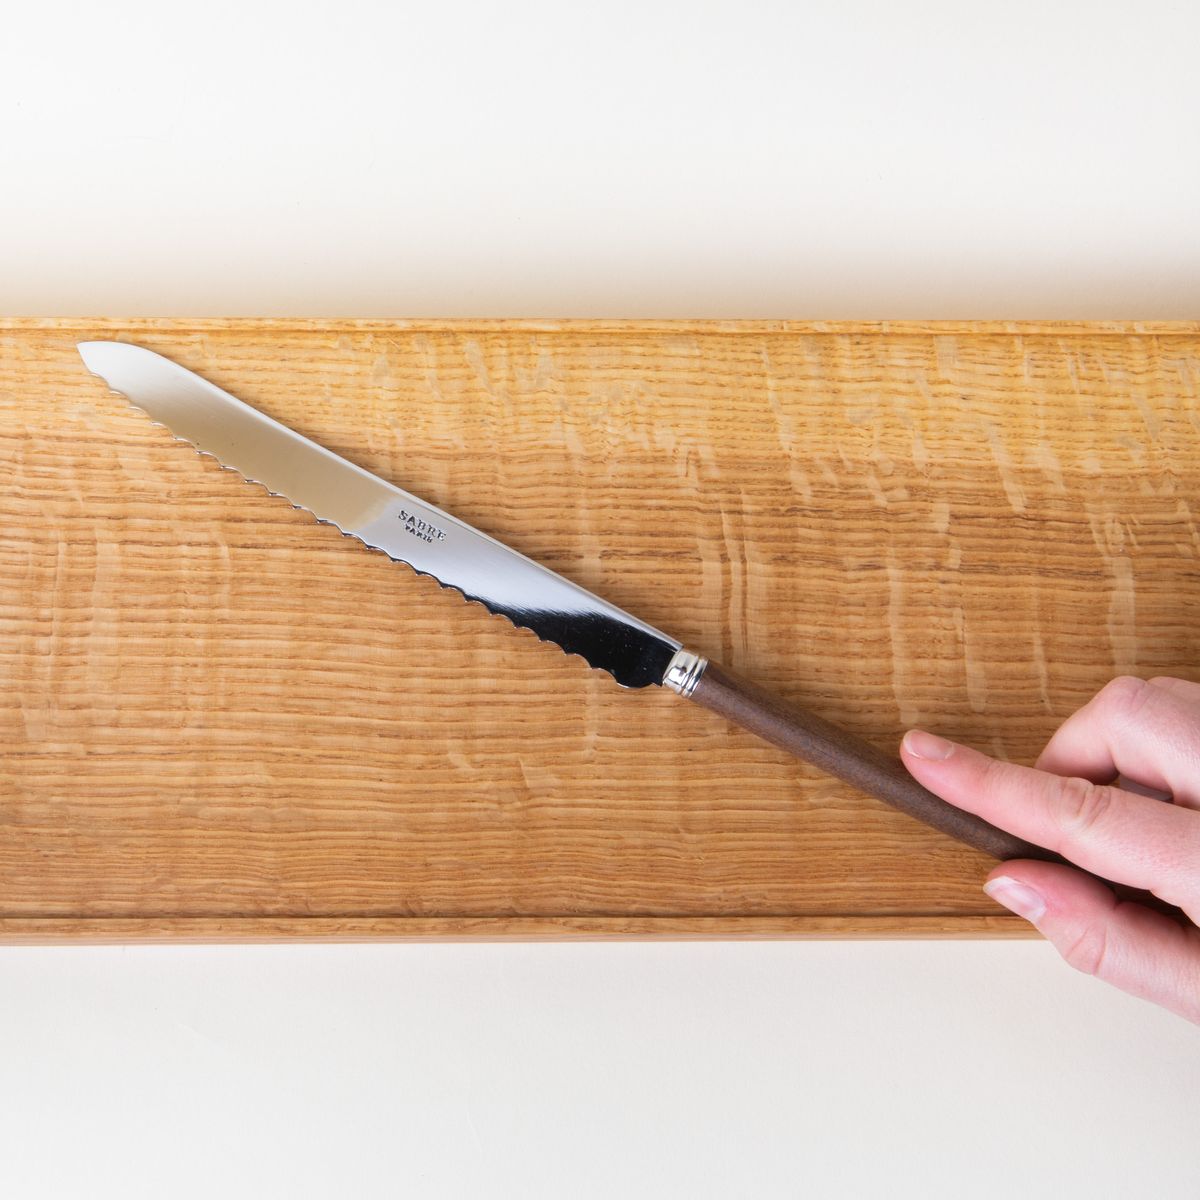 A hand holding a long bread knife with a steel blade and simple wood handle with a cutting board